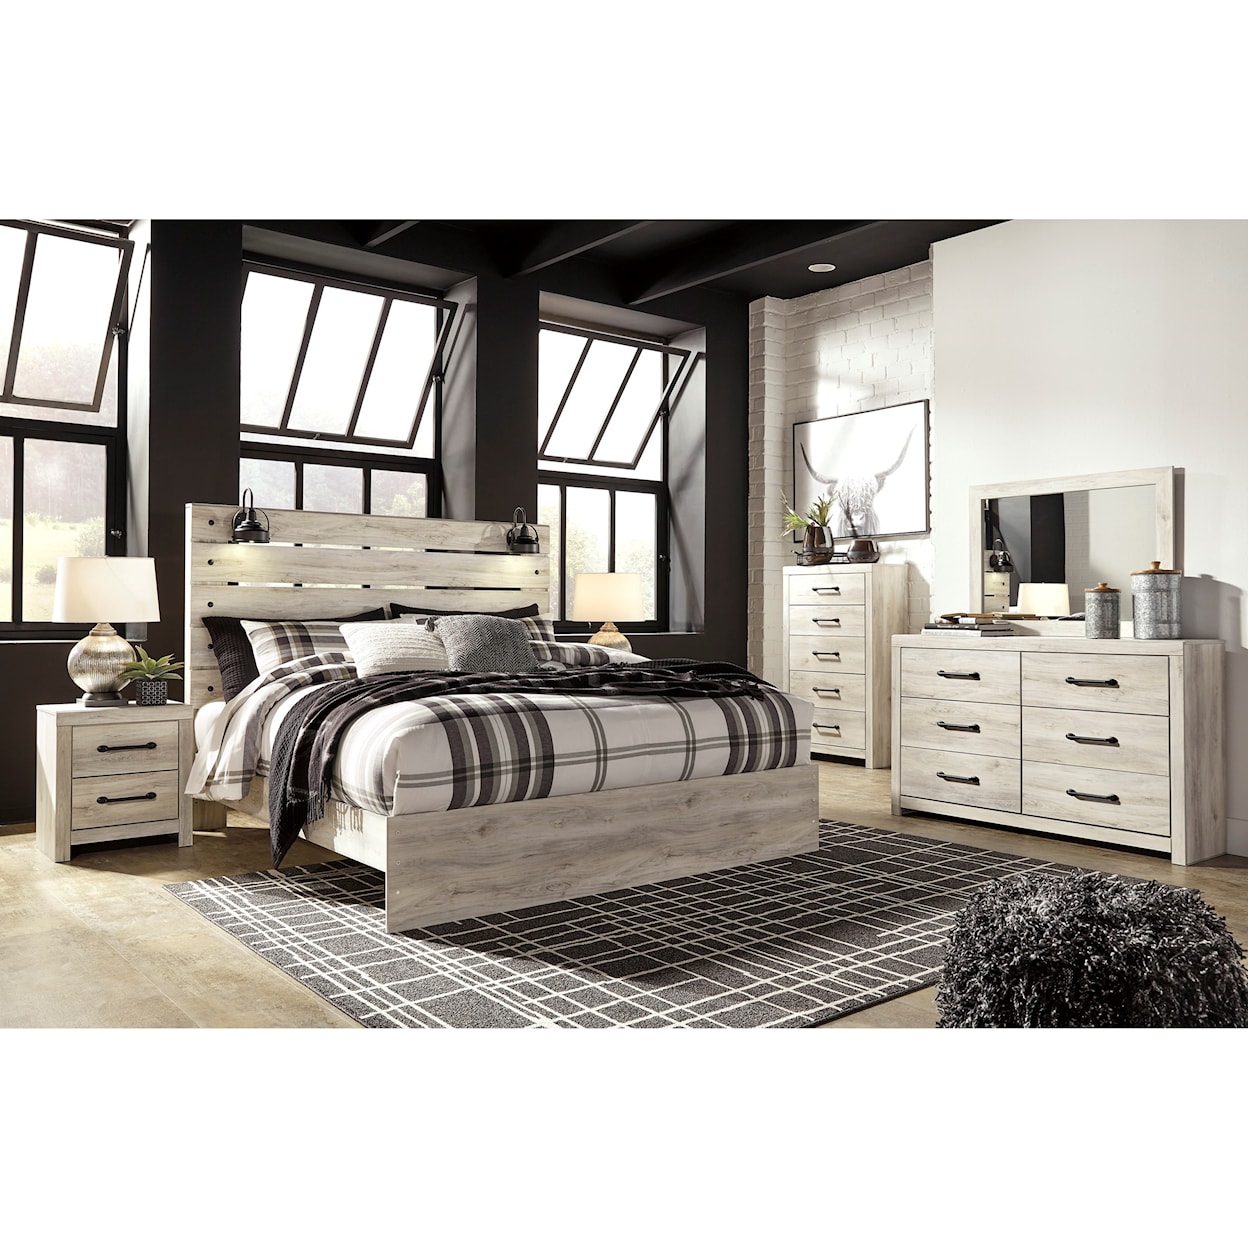 Signature Design by Ashley Furniture Cambeck King Bedroom Group